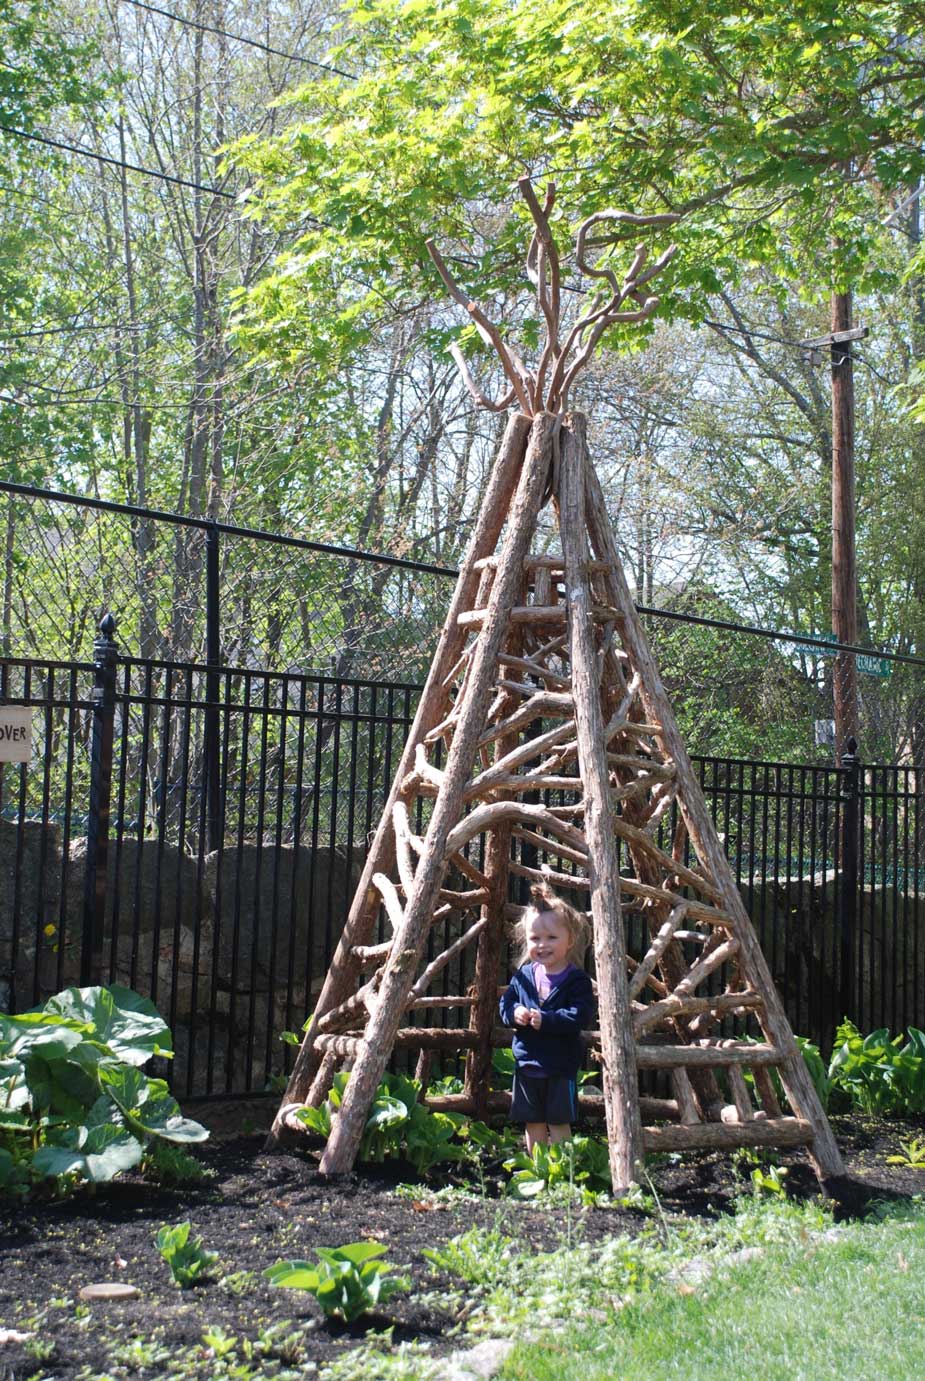 Outdoor tepee in the rustic style using logs and branches titled the Easton Tepee